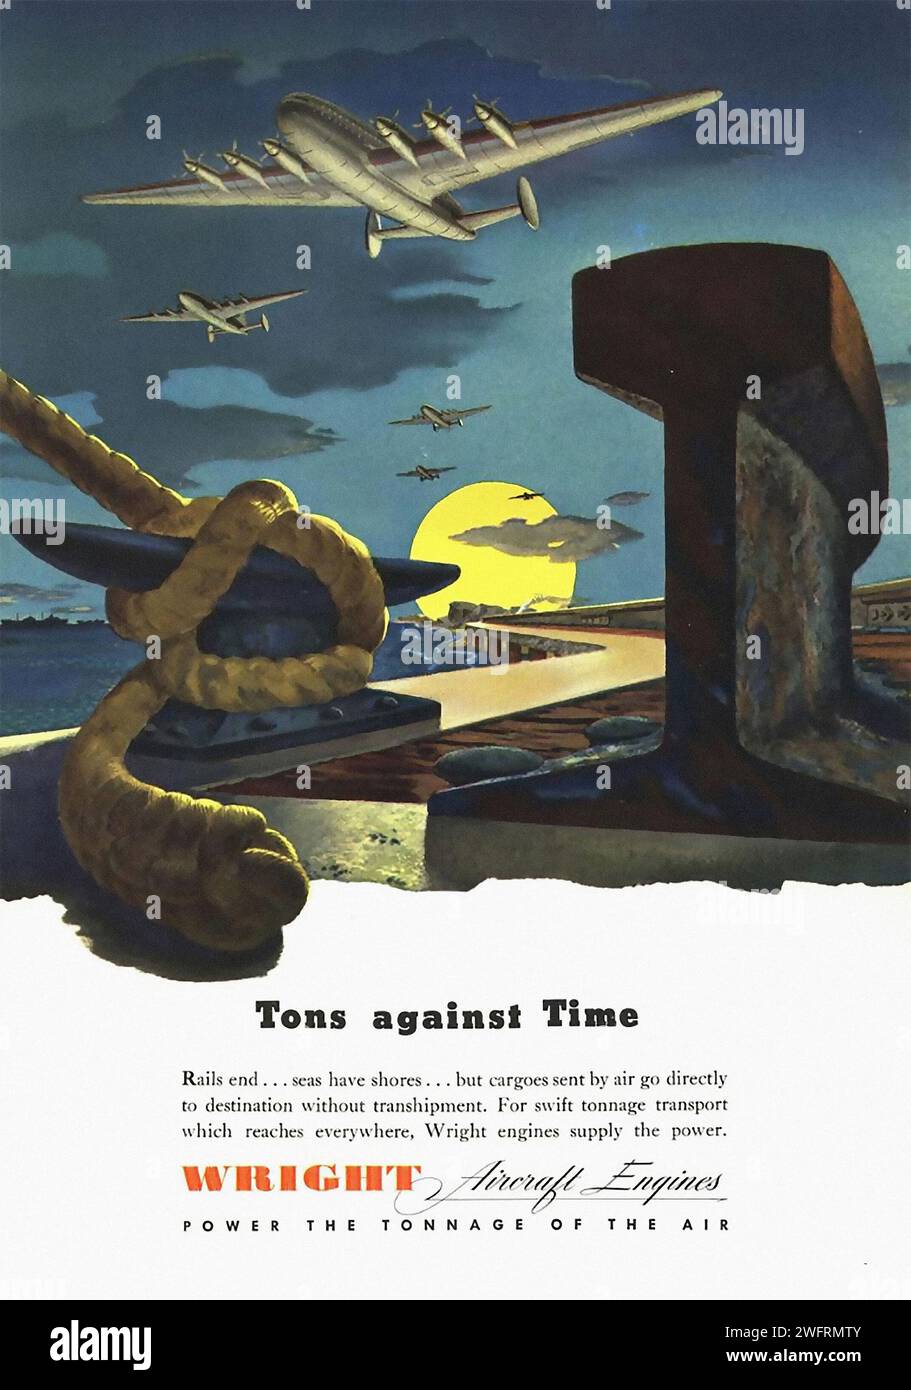 Rails end…seas have shores…but cargo planes go directly to destination without shipwreck. For swift tonnage transport which reaches everywhere Wright engines supply the power. WRIGHT AEROBRIDGE ENGINES  A vintage advertisement for air travel titled “Tons against Time”. The advertisement features a large anchor and a hammer in the foreground against a background of a blue sky with airplanes flying in formation. The text on the advertisement reads “Rails end…seas have shores…but cargo planes go directly to destination without shipwreck. For swift tonnage transport which reaches everywhere Wright Stock Photo